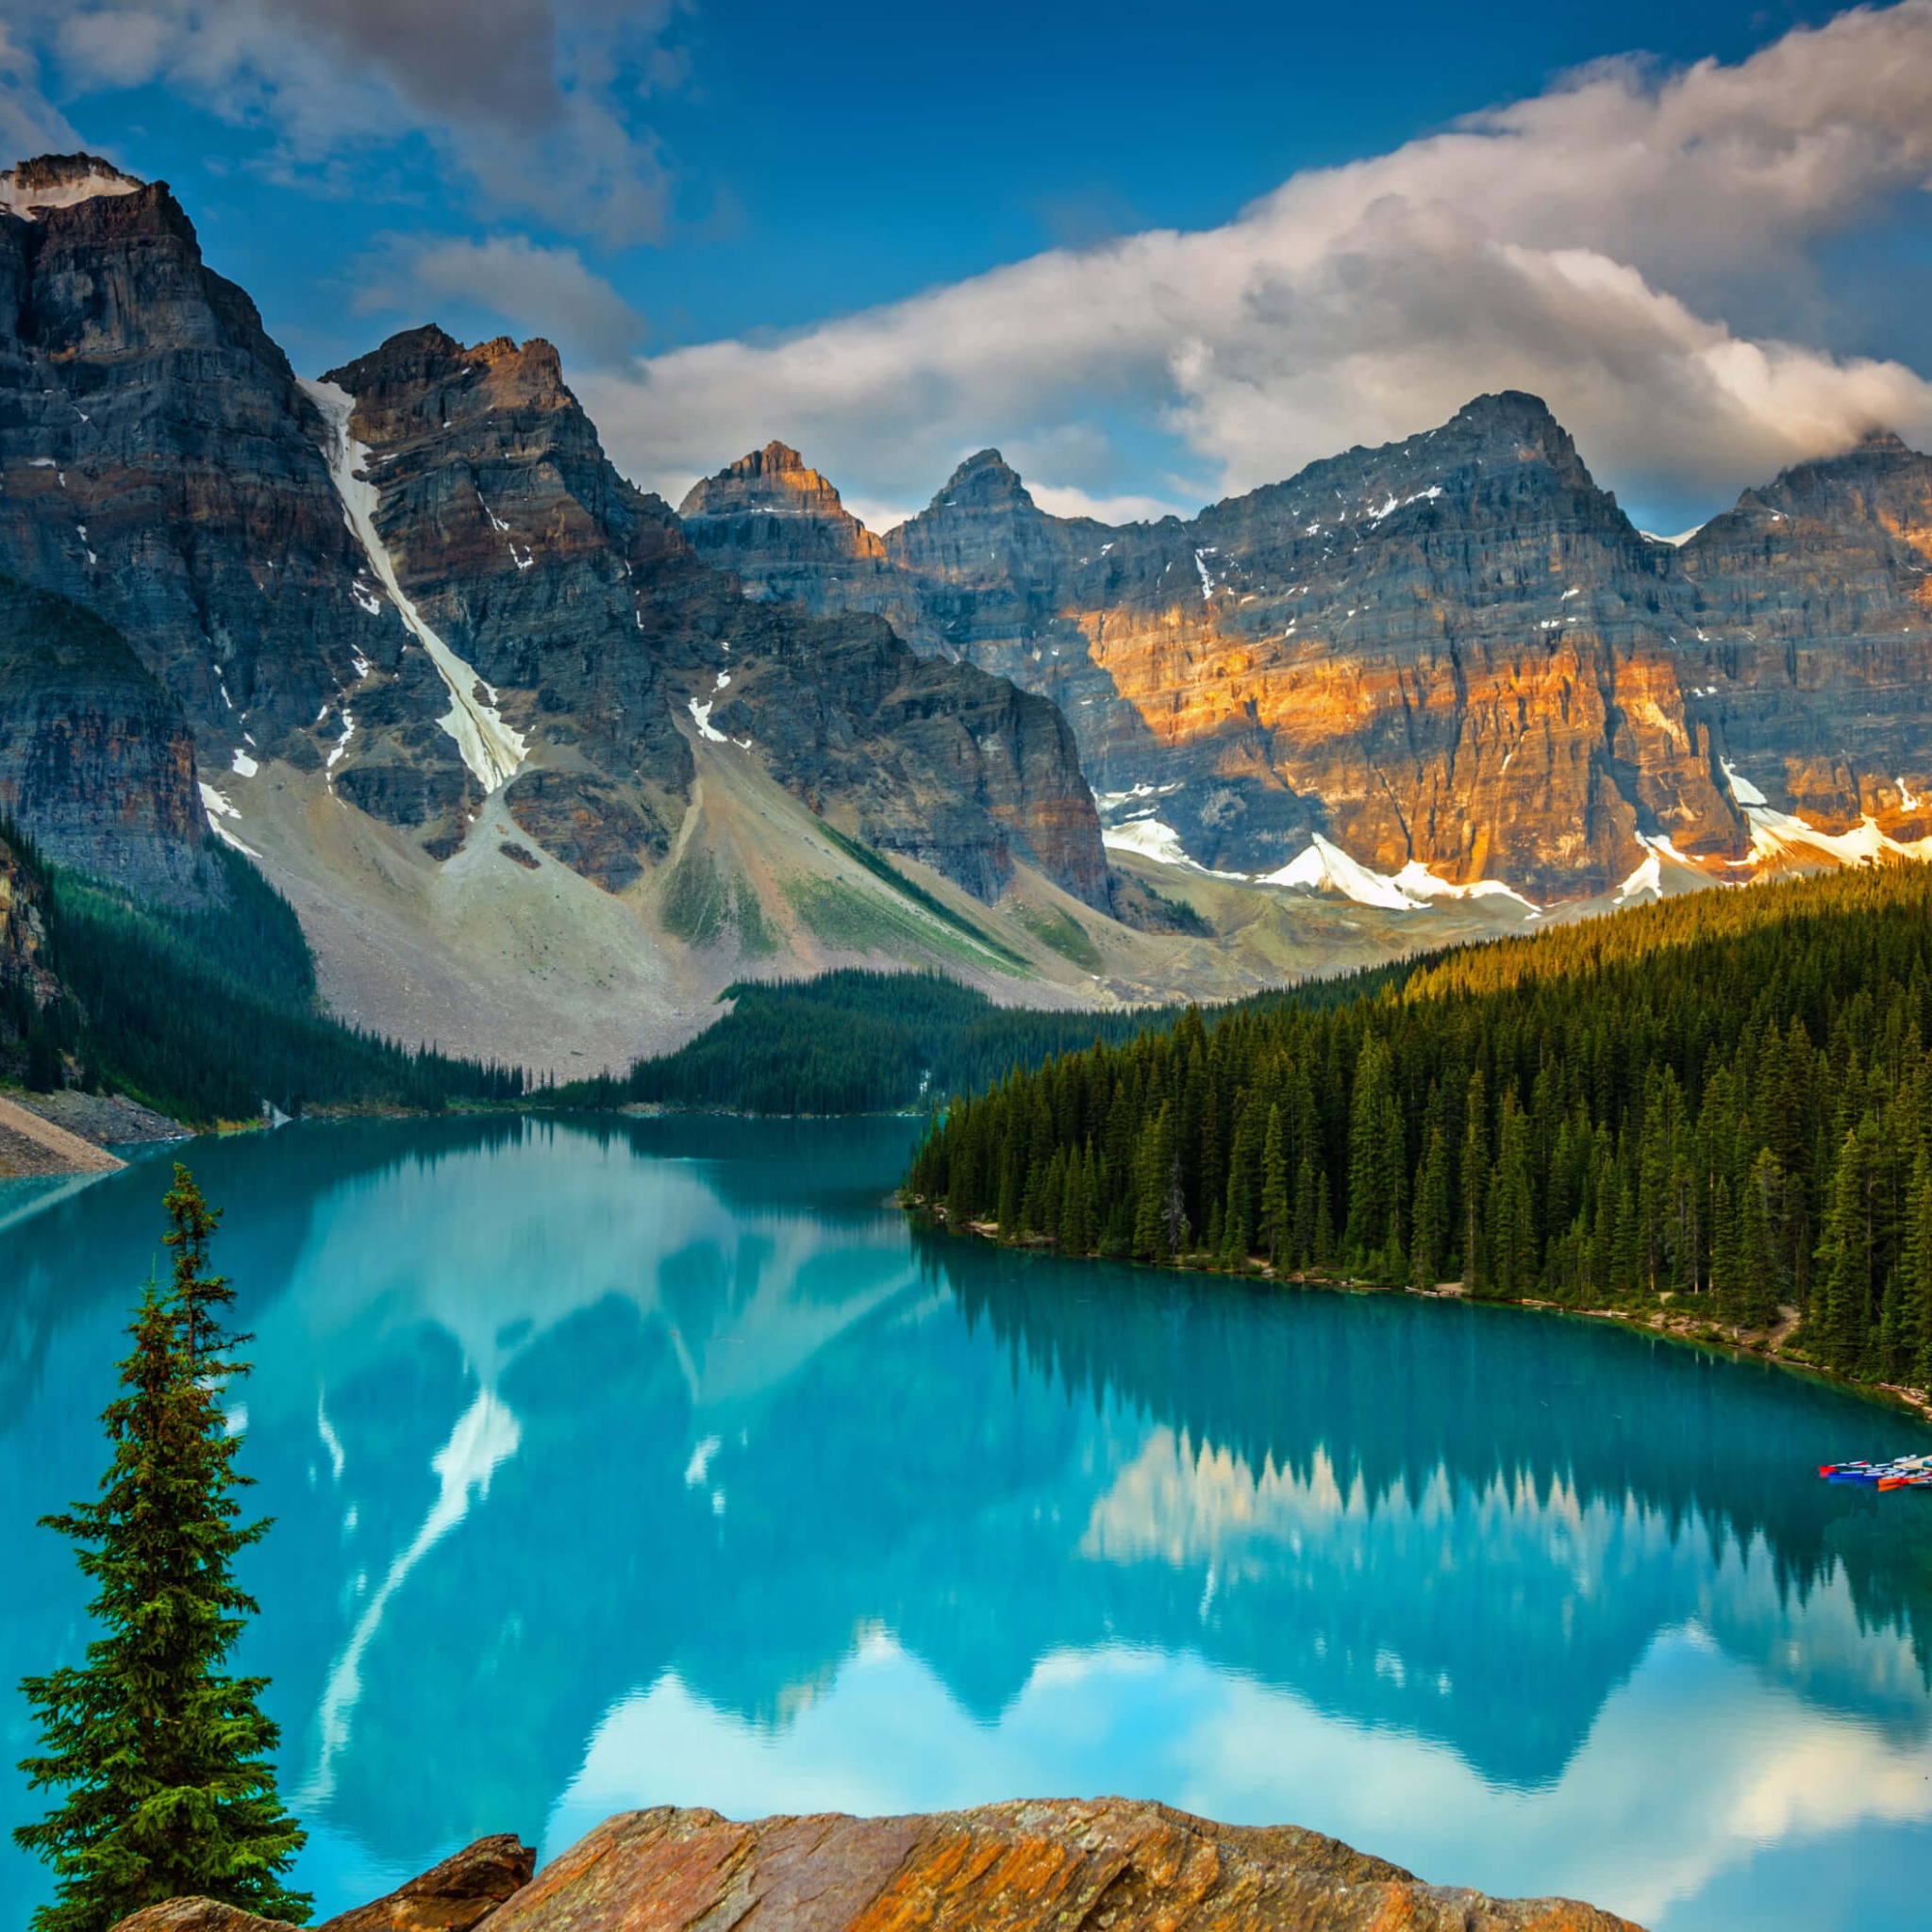 Mobile wallpaper: Lakes, Mountain, Lake, Reflection, Canada, Earth, Cliff,  Alberta, Moraine Lake, Banff National Park, Canadian Rockies, 1085144  download the picture for free.